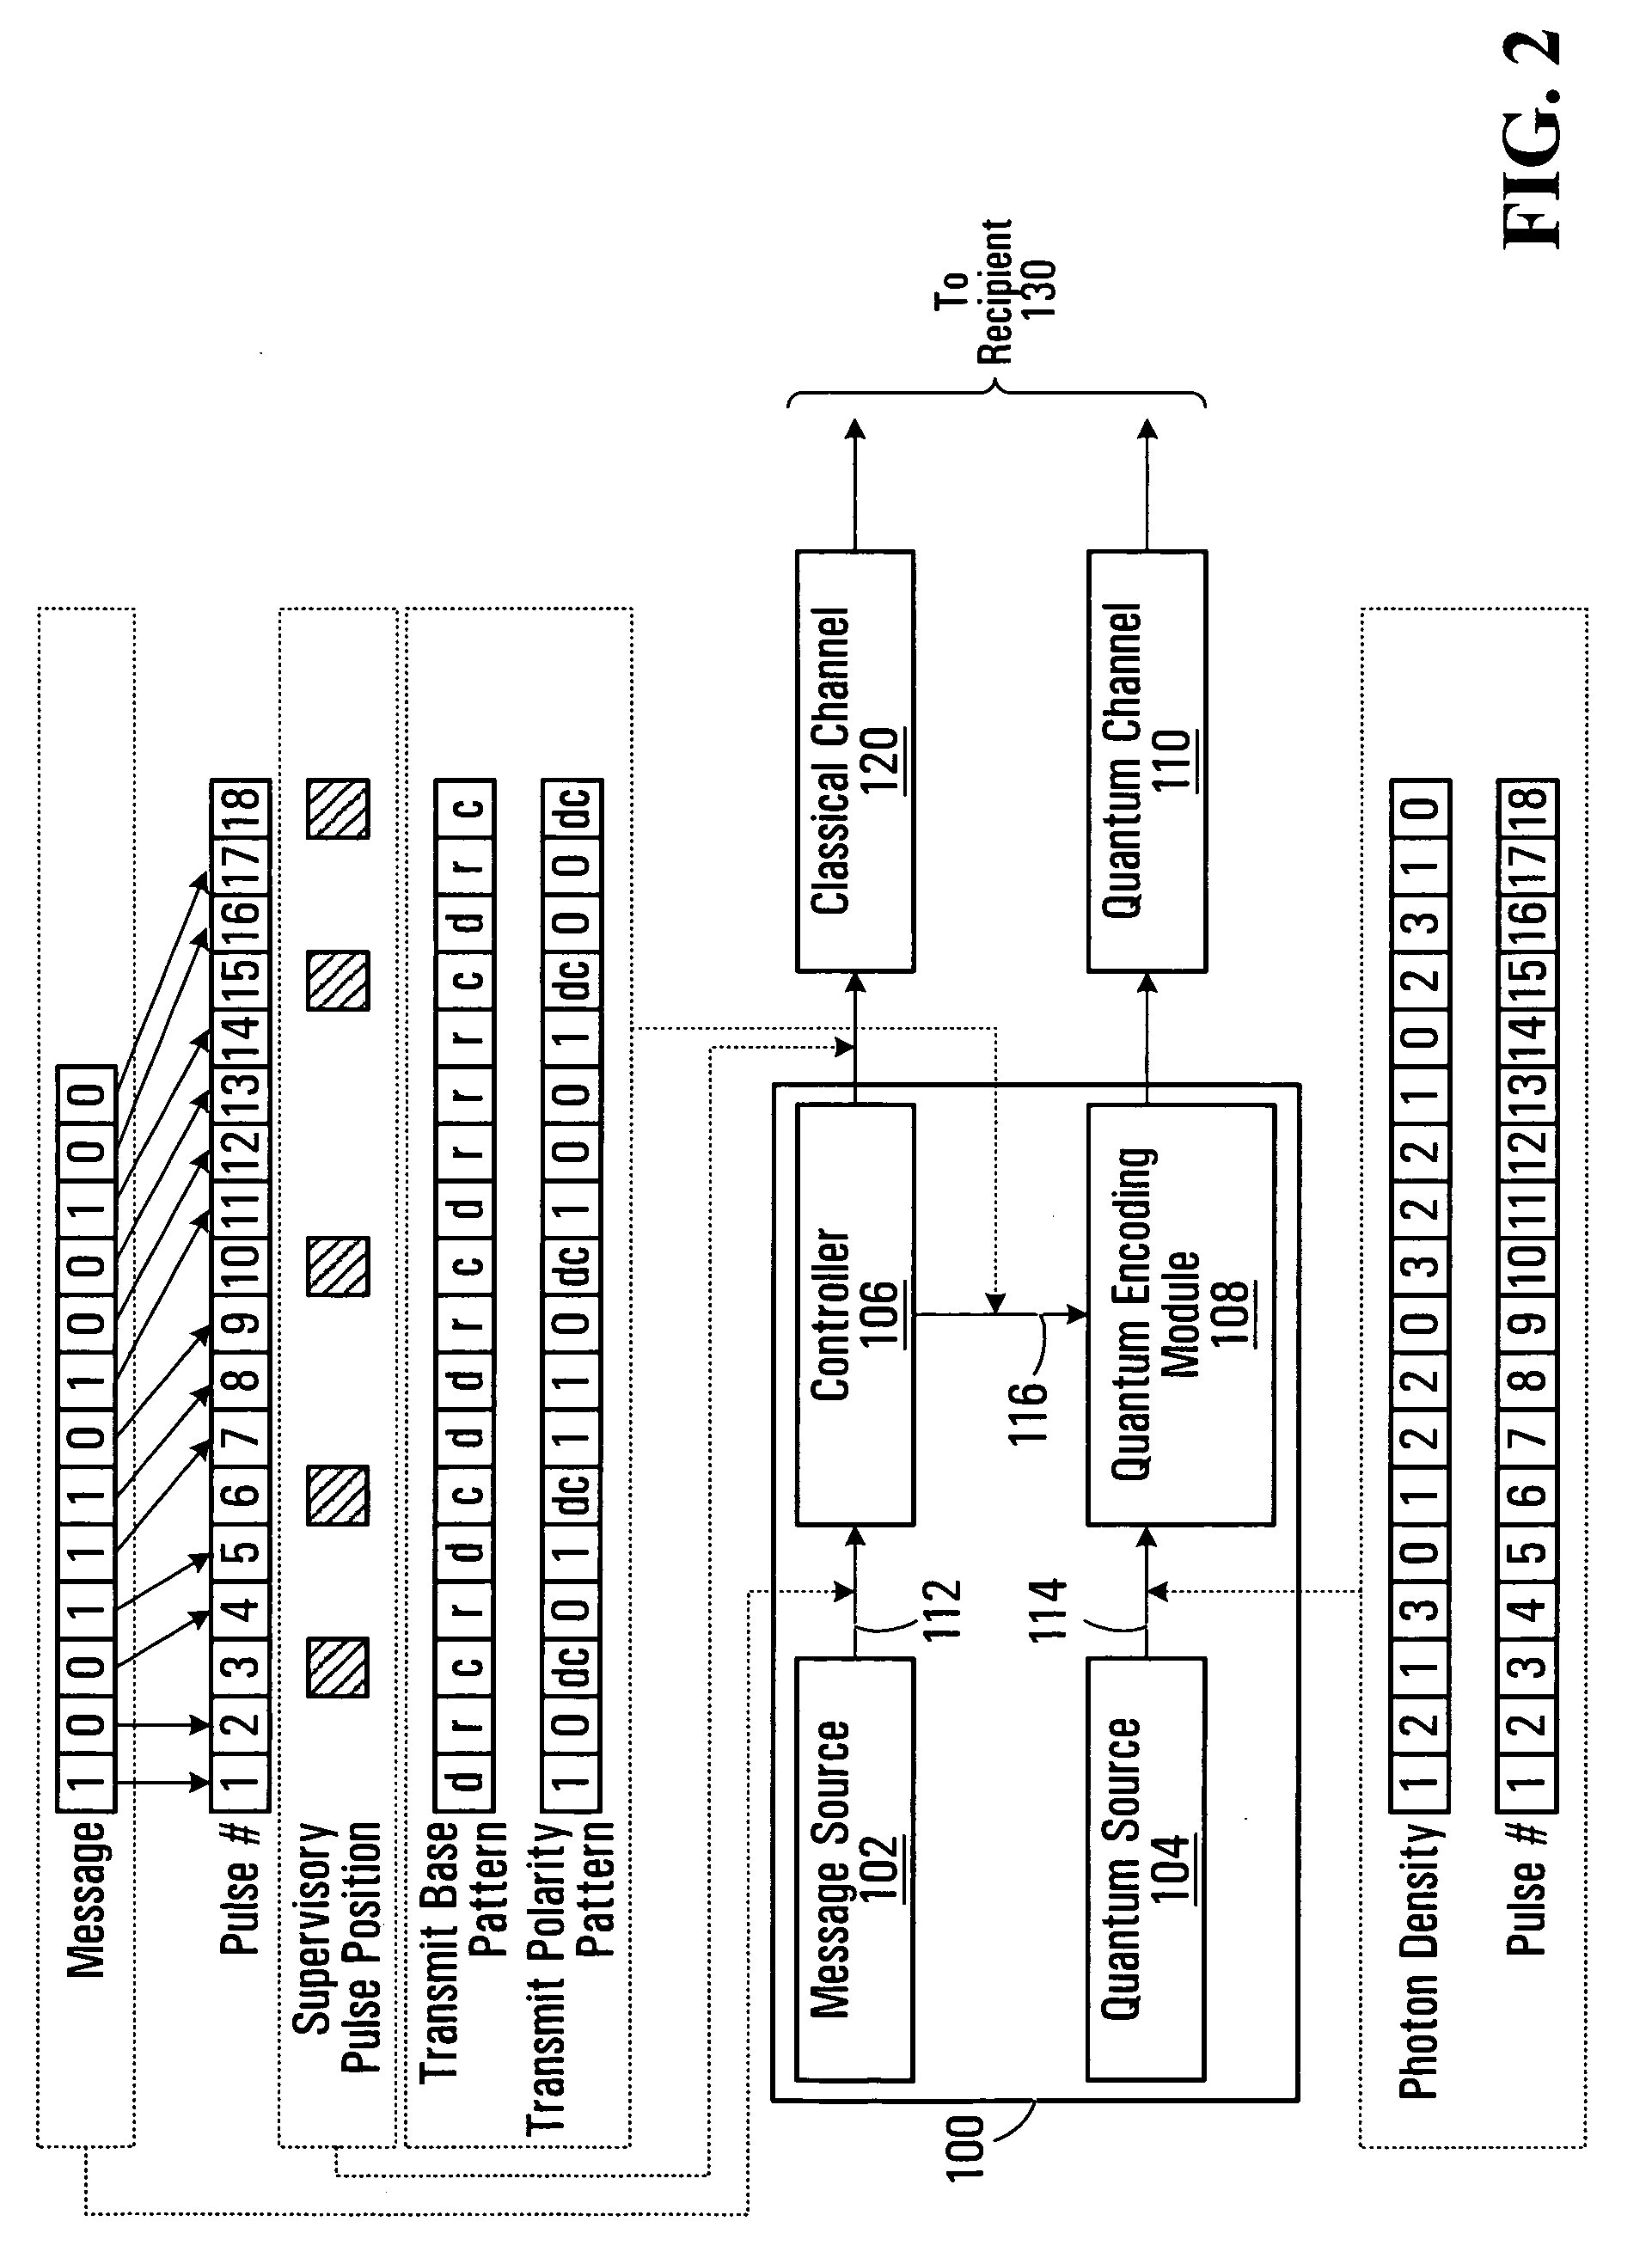 Methods and apparatus for monitoring the integrity of a quantum channel supporting multi-quanta pulse transmission